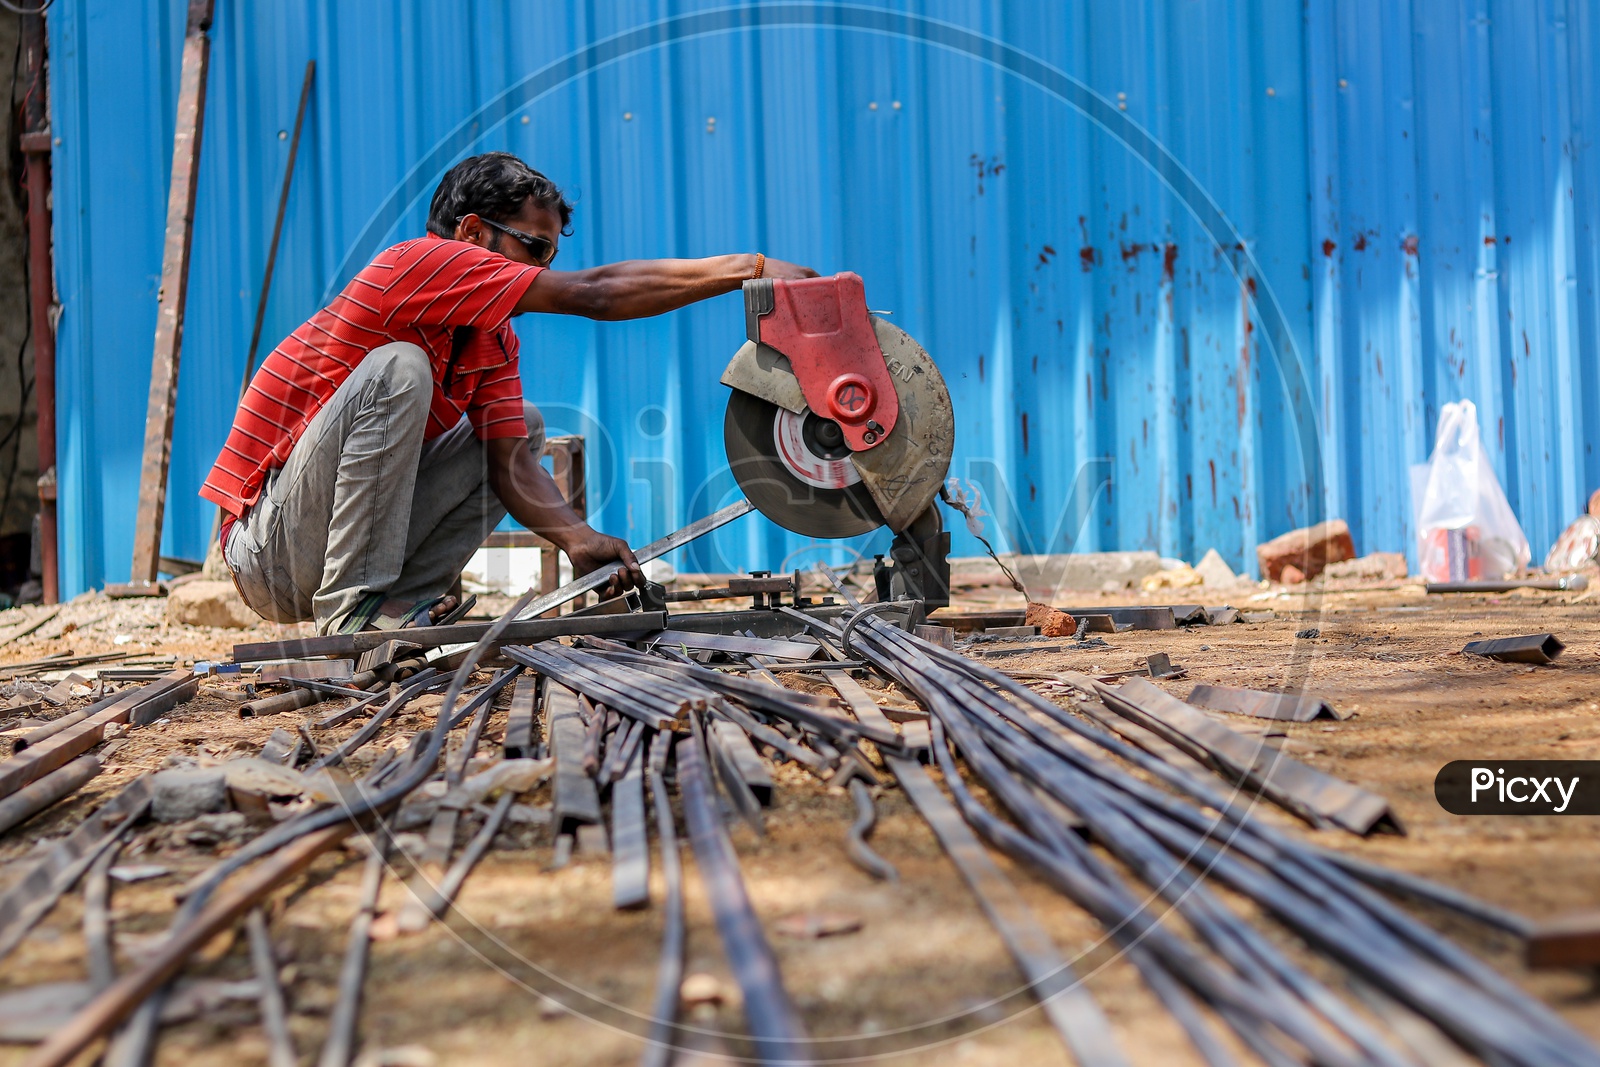 Indian Cutter Worker cutting Iron Wedges with a Cutter